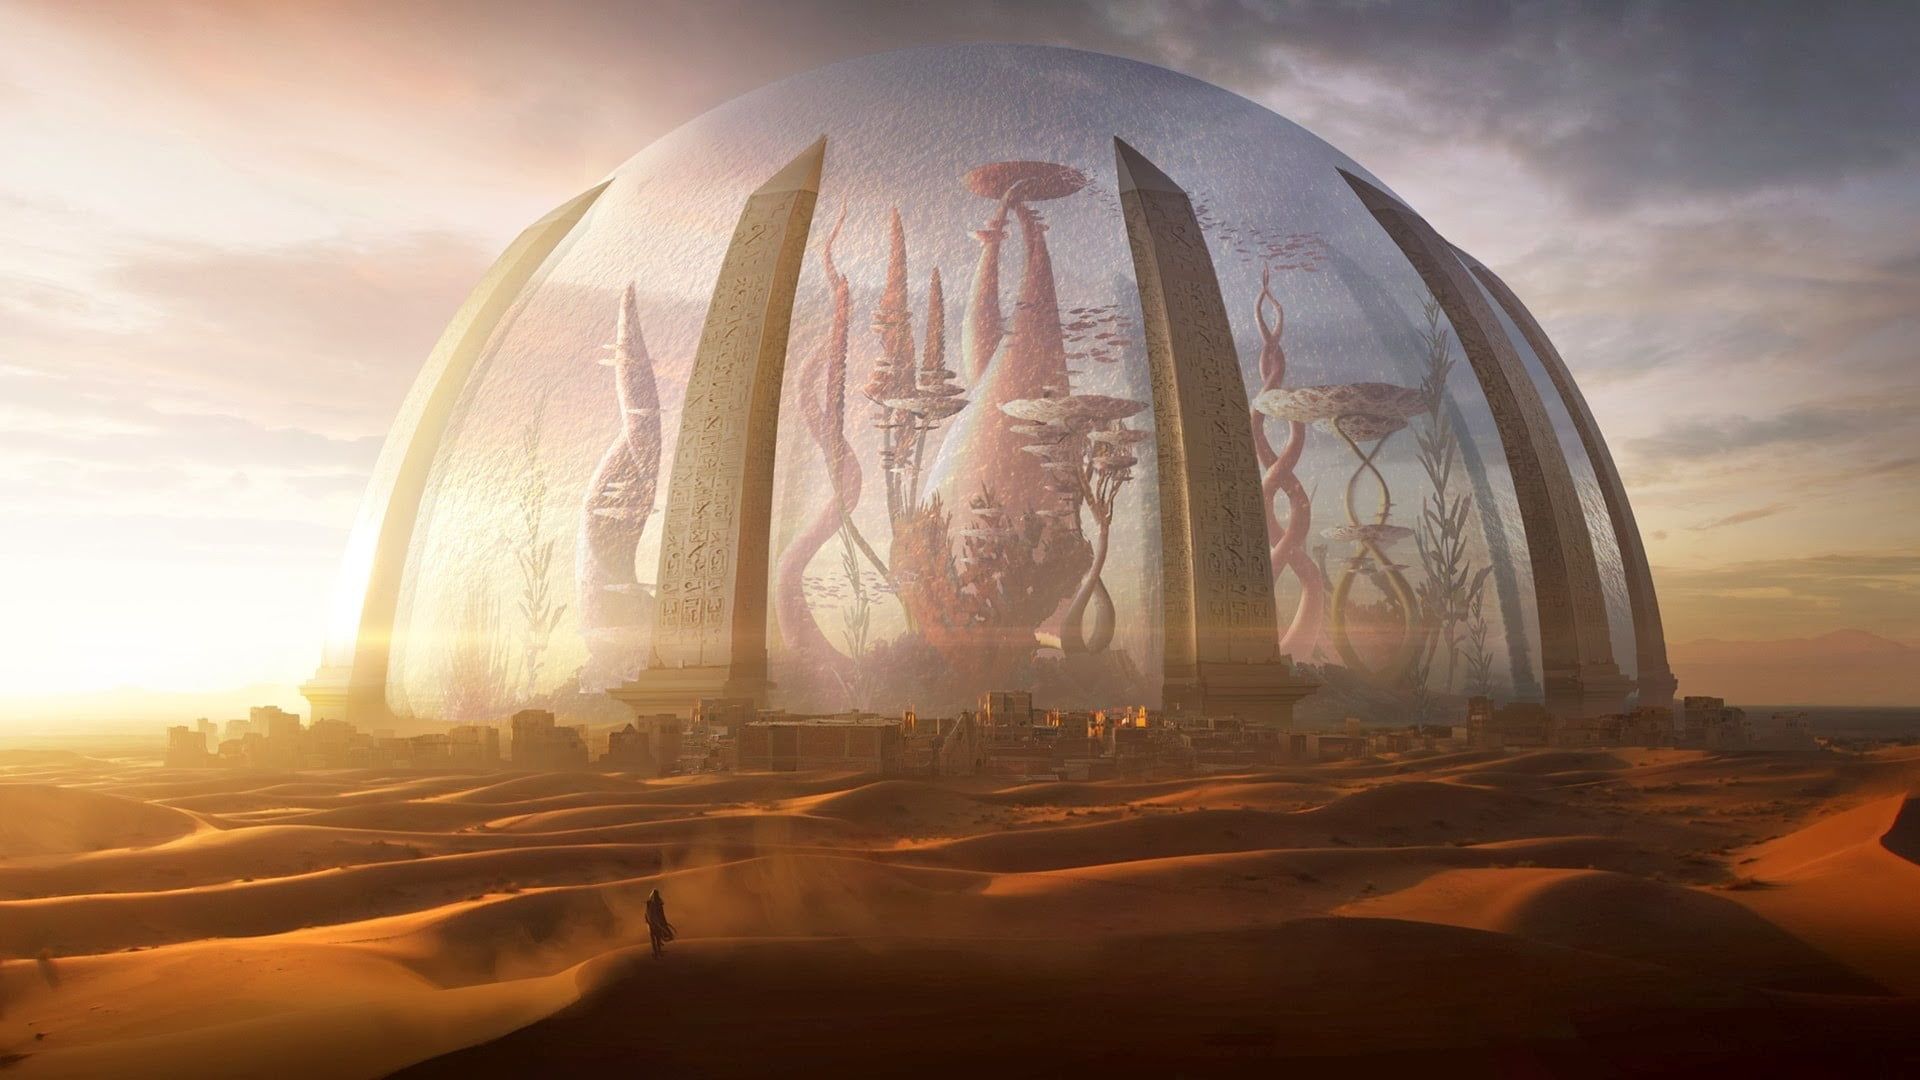 Glass dome city in middle of desert poster, digital art, Torment